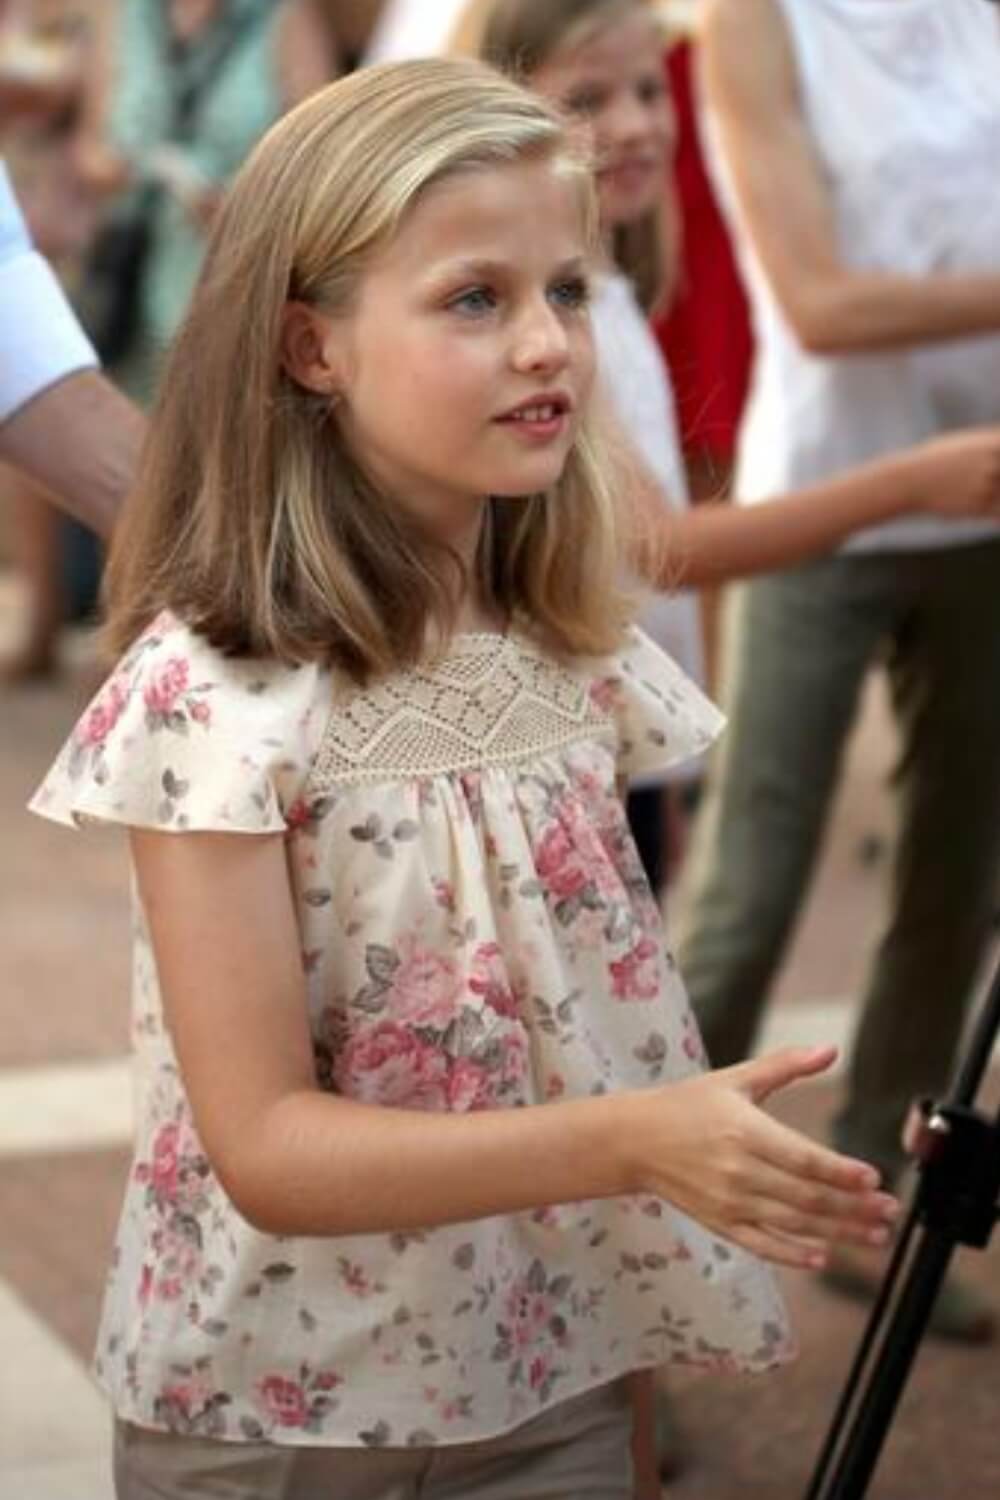 Princess Leonor at the event where she debuted her blunt bob haircut